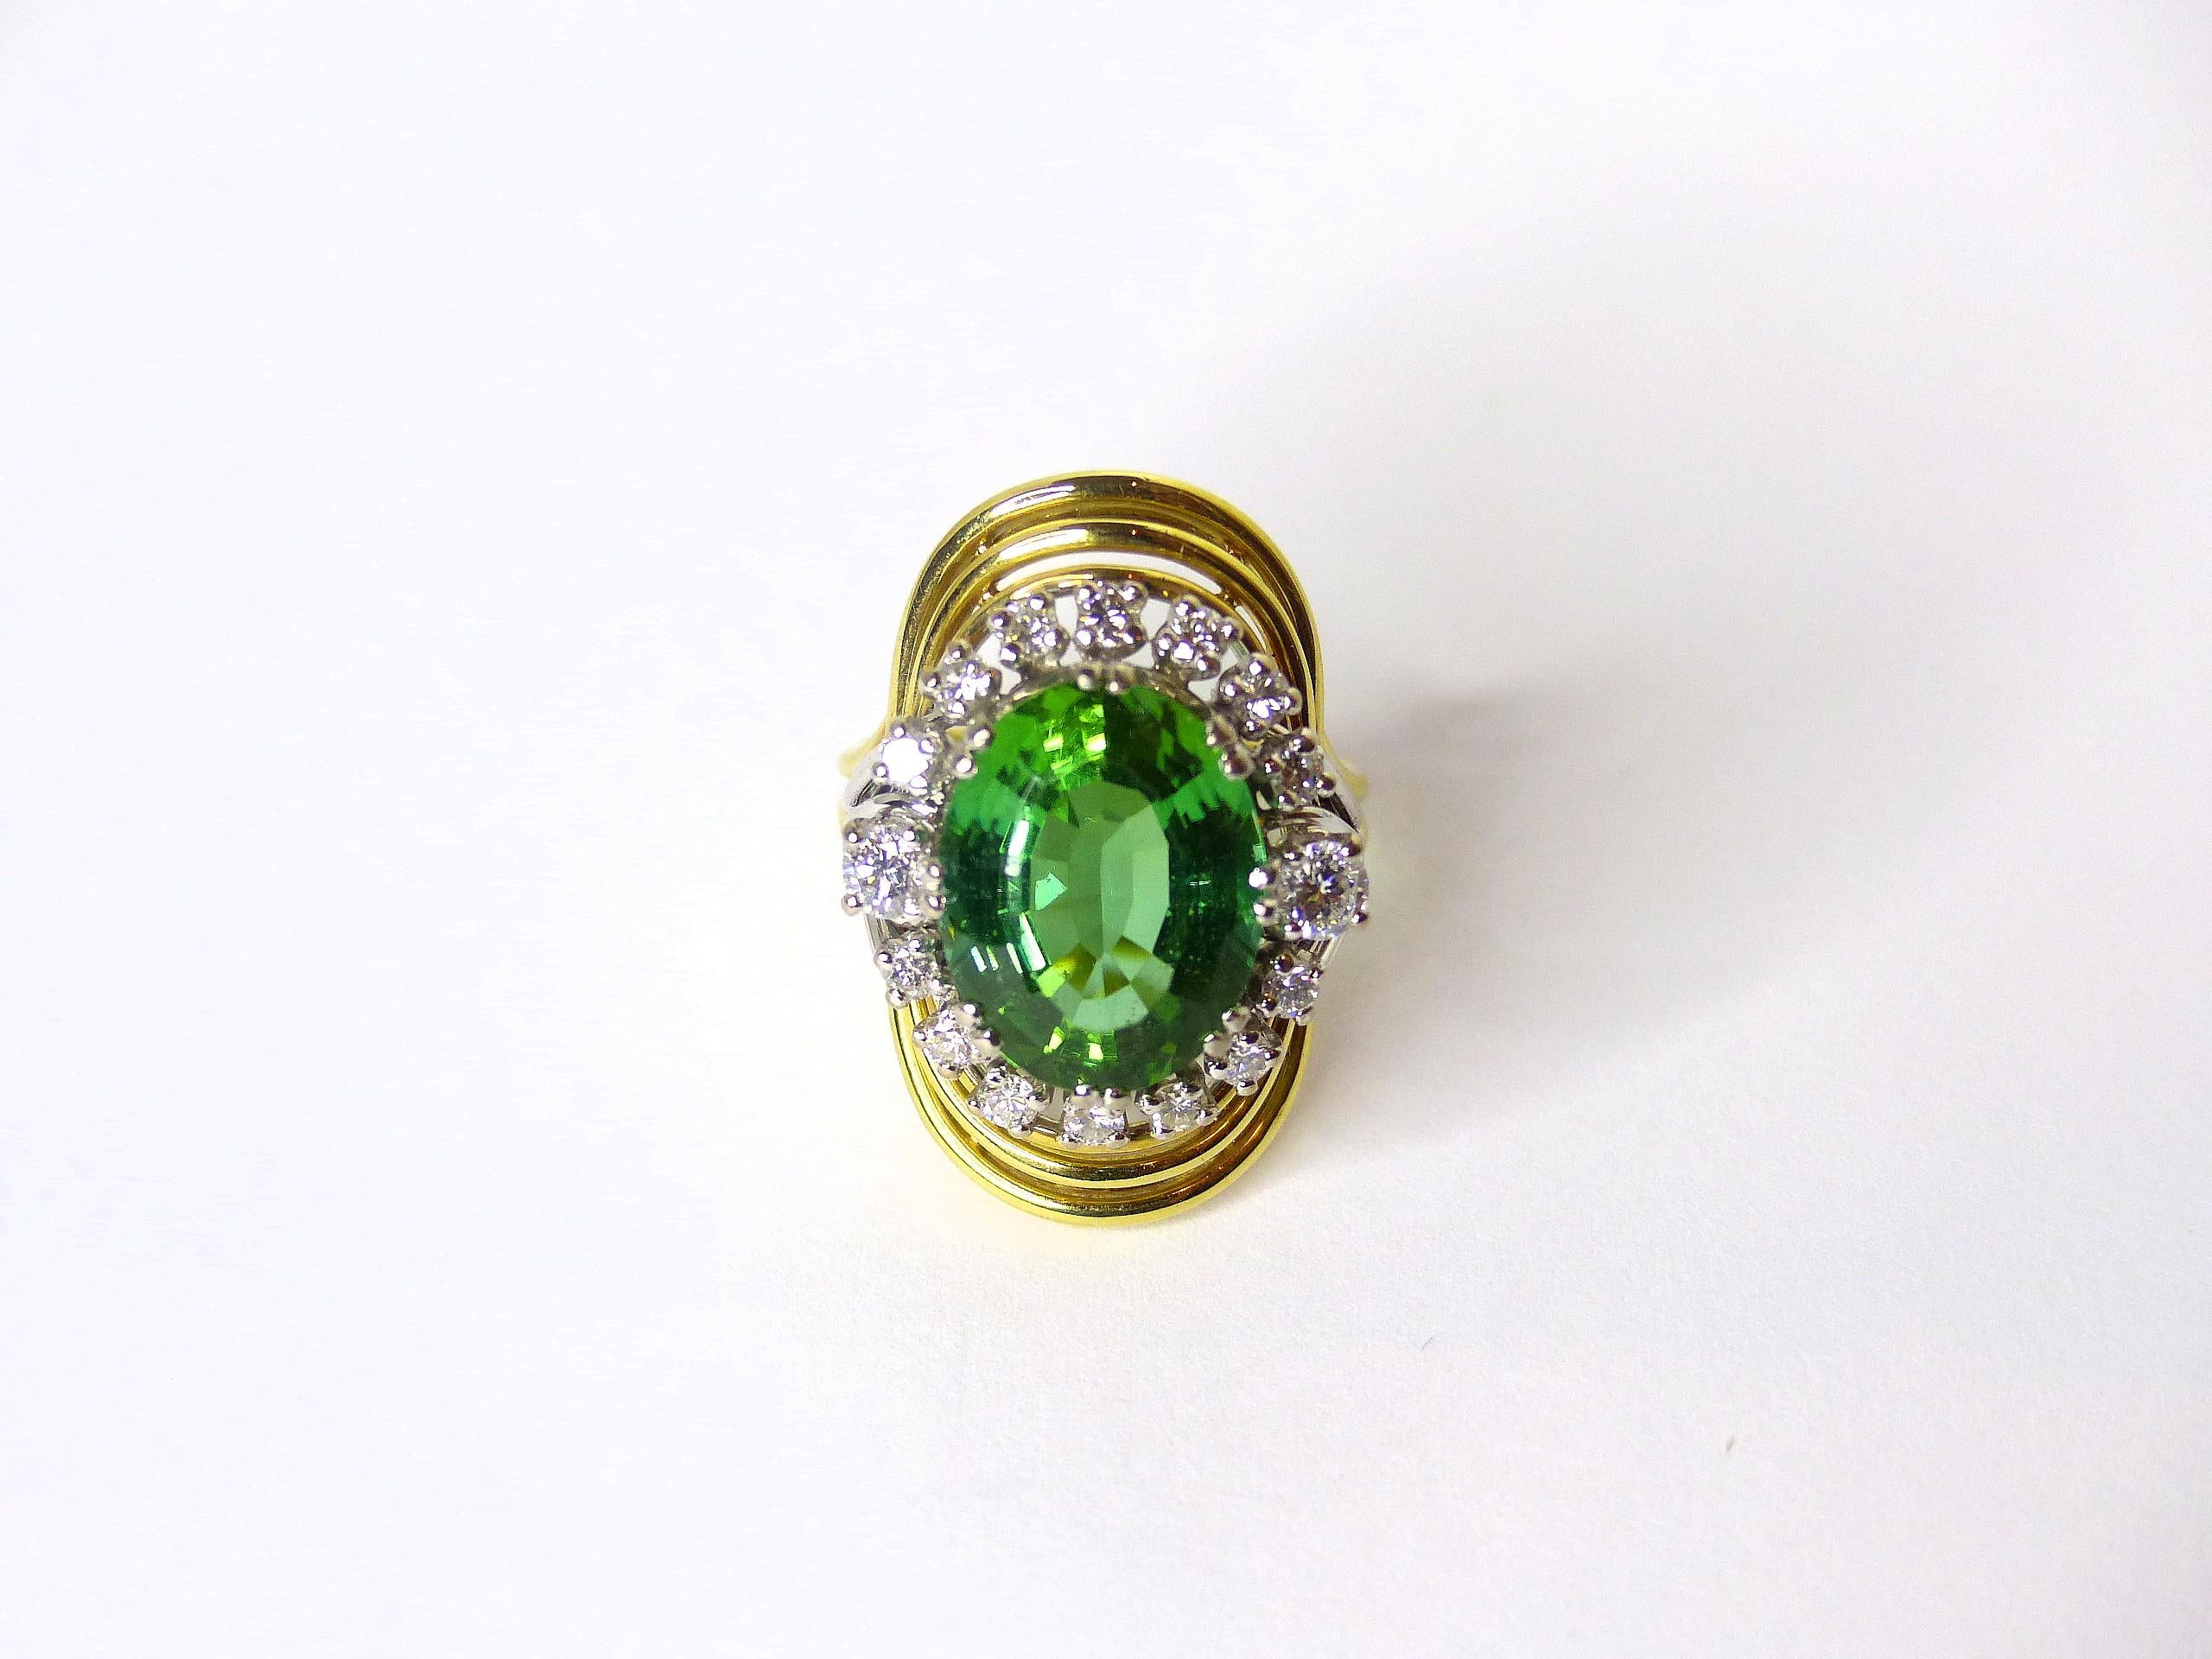 Thomas Leyser is renowned for his contemporary jewellery designs utilizing fine gemstones.

This 14k yellow gold ring 10,74gr. is set with 1 top quality Tourmaline in magnificient colour with Namibia origin, oval 15x11mm, 8,21ct. and 16 Diamonds